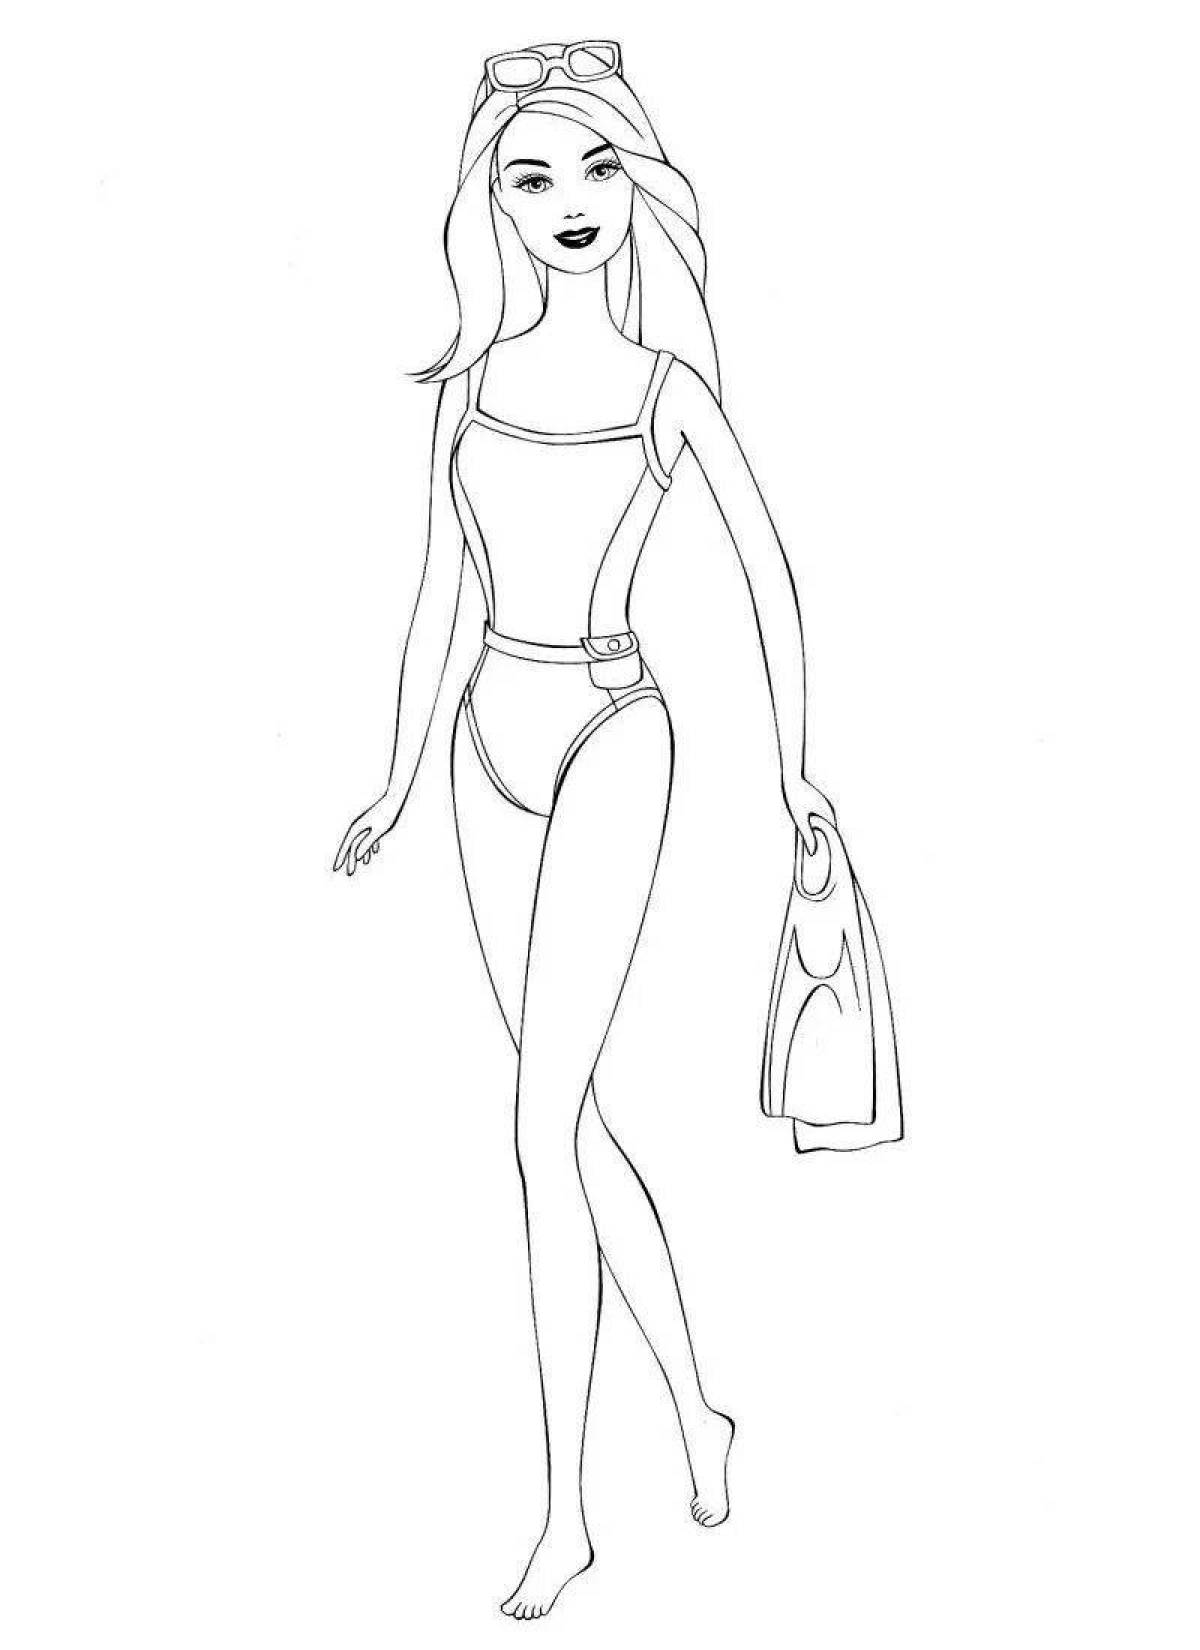 Coloring page shiny barbie in swimsuit